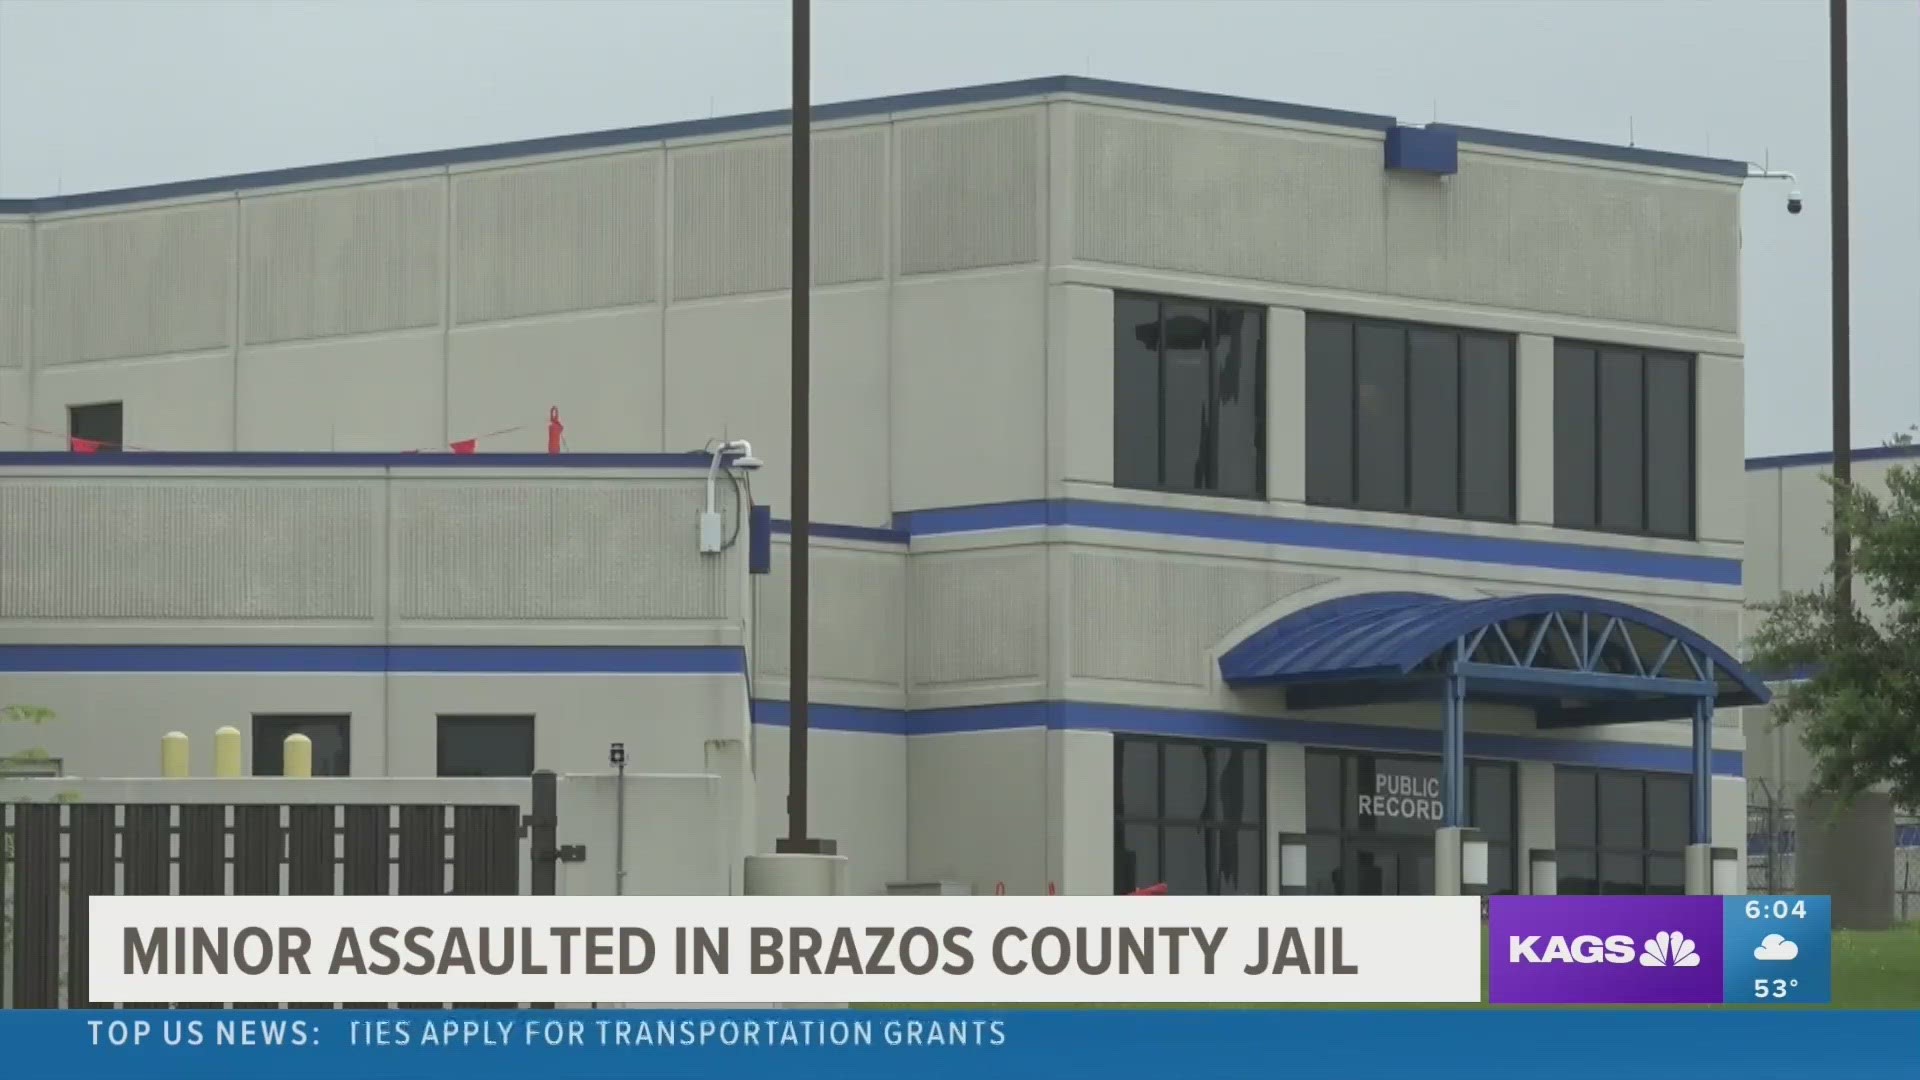 The Texas Commission on Jail Standards filed the suit against the Brazos County Jail for what they claim was a failure to comply with minimum jail standards.